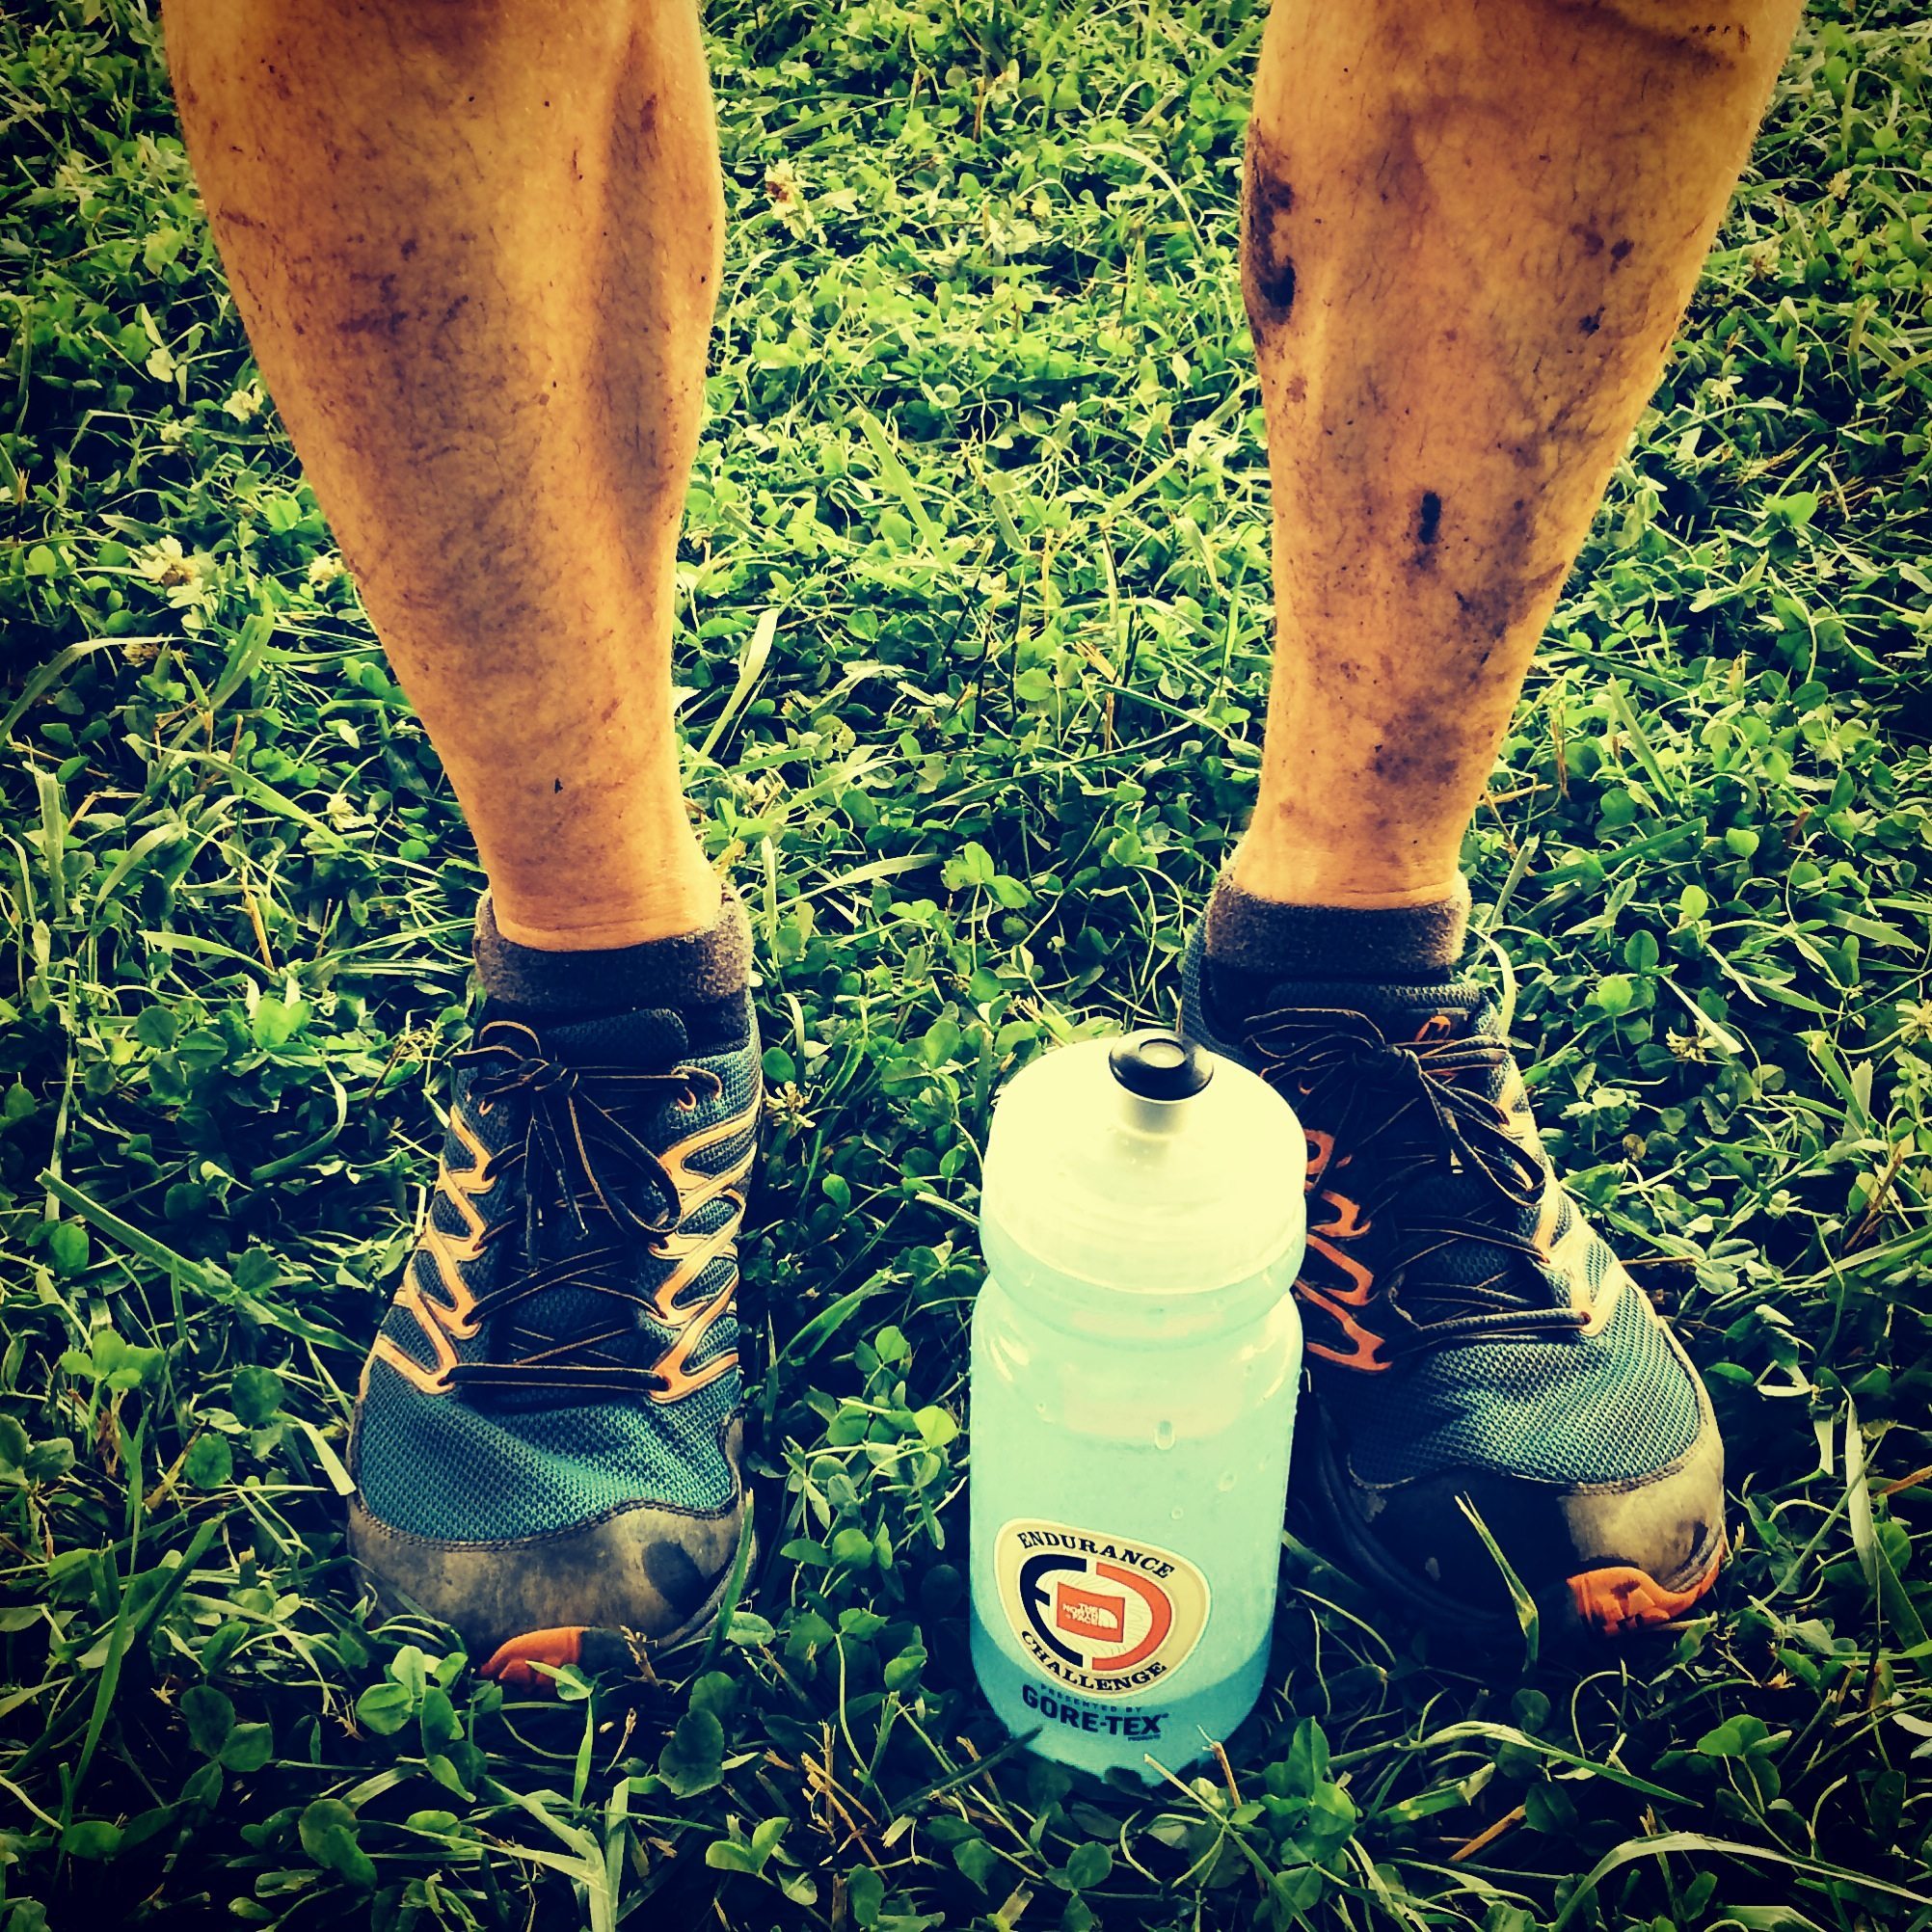 Post-race Happy Feet in the Merrell Bare Access Trail and Injinji TRAIL 2.0